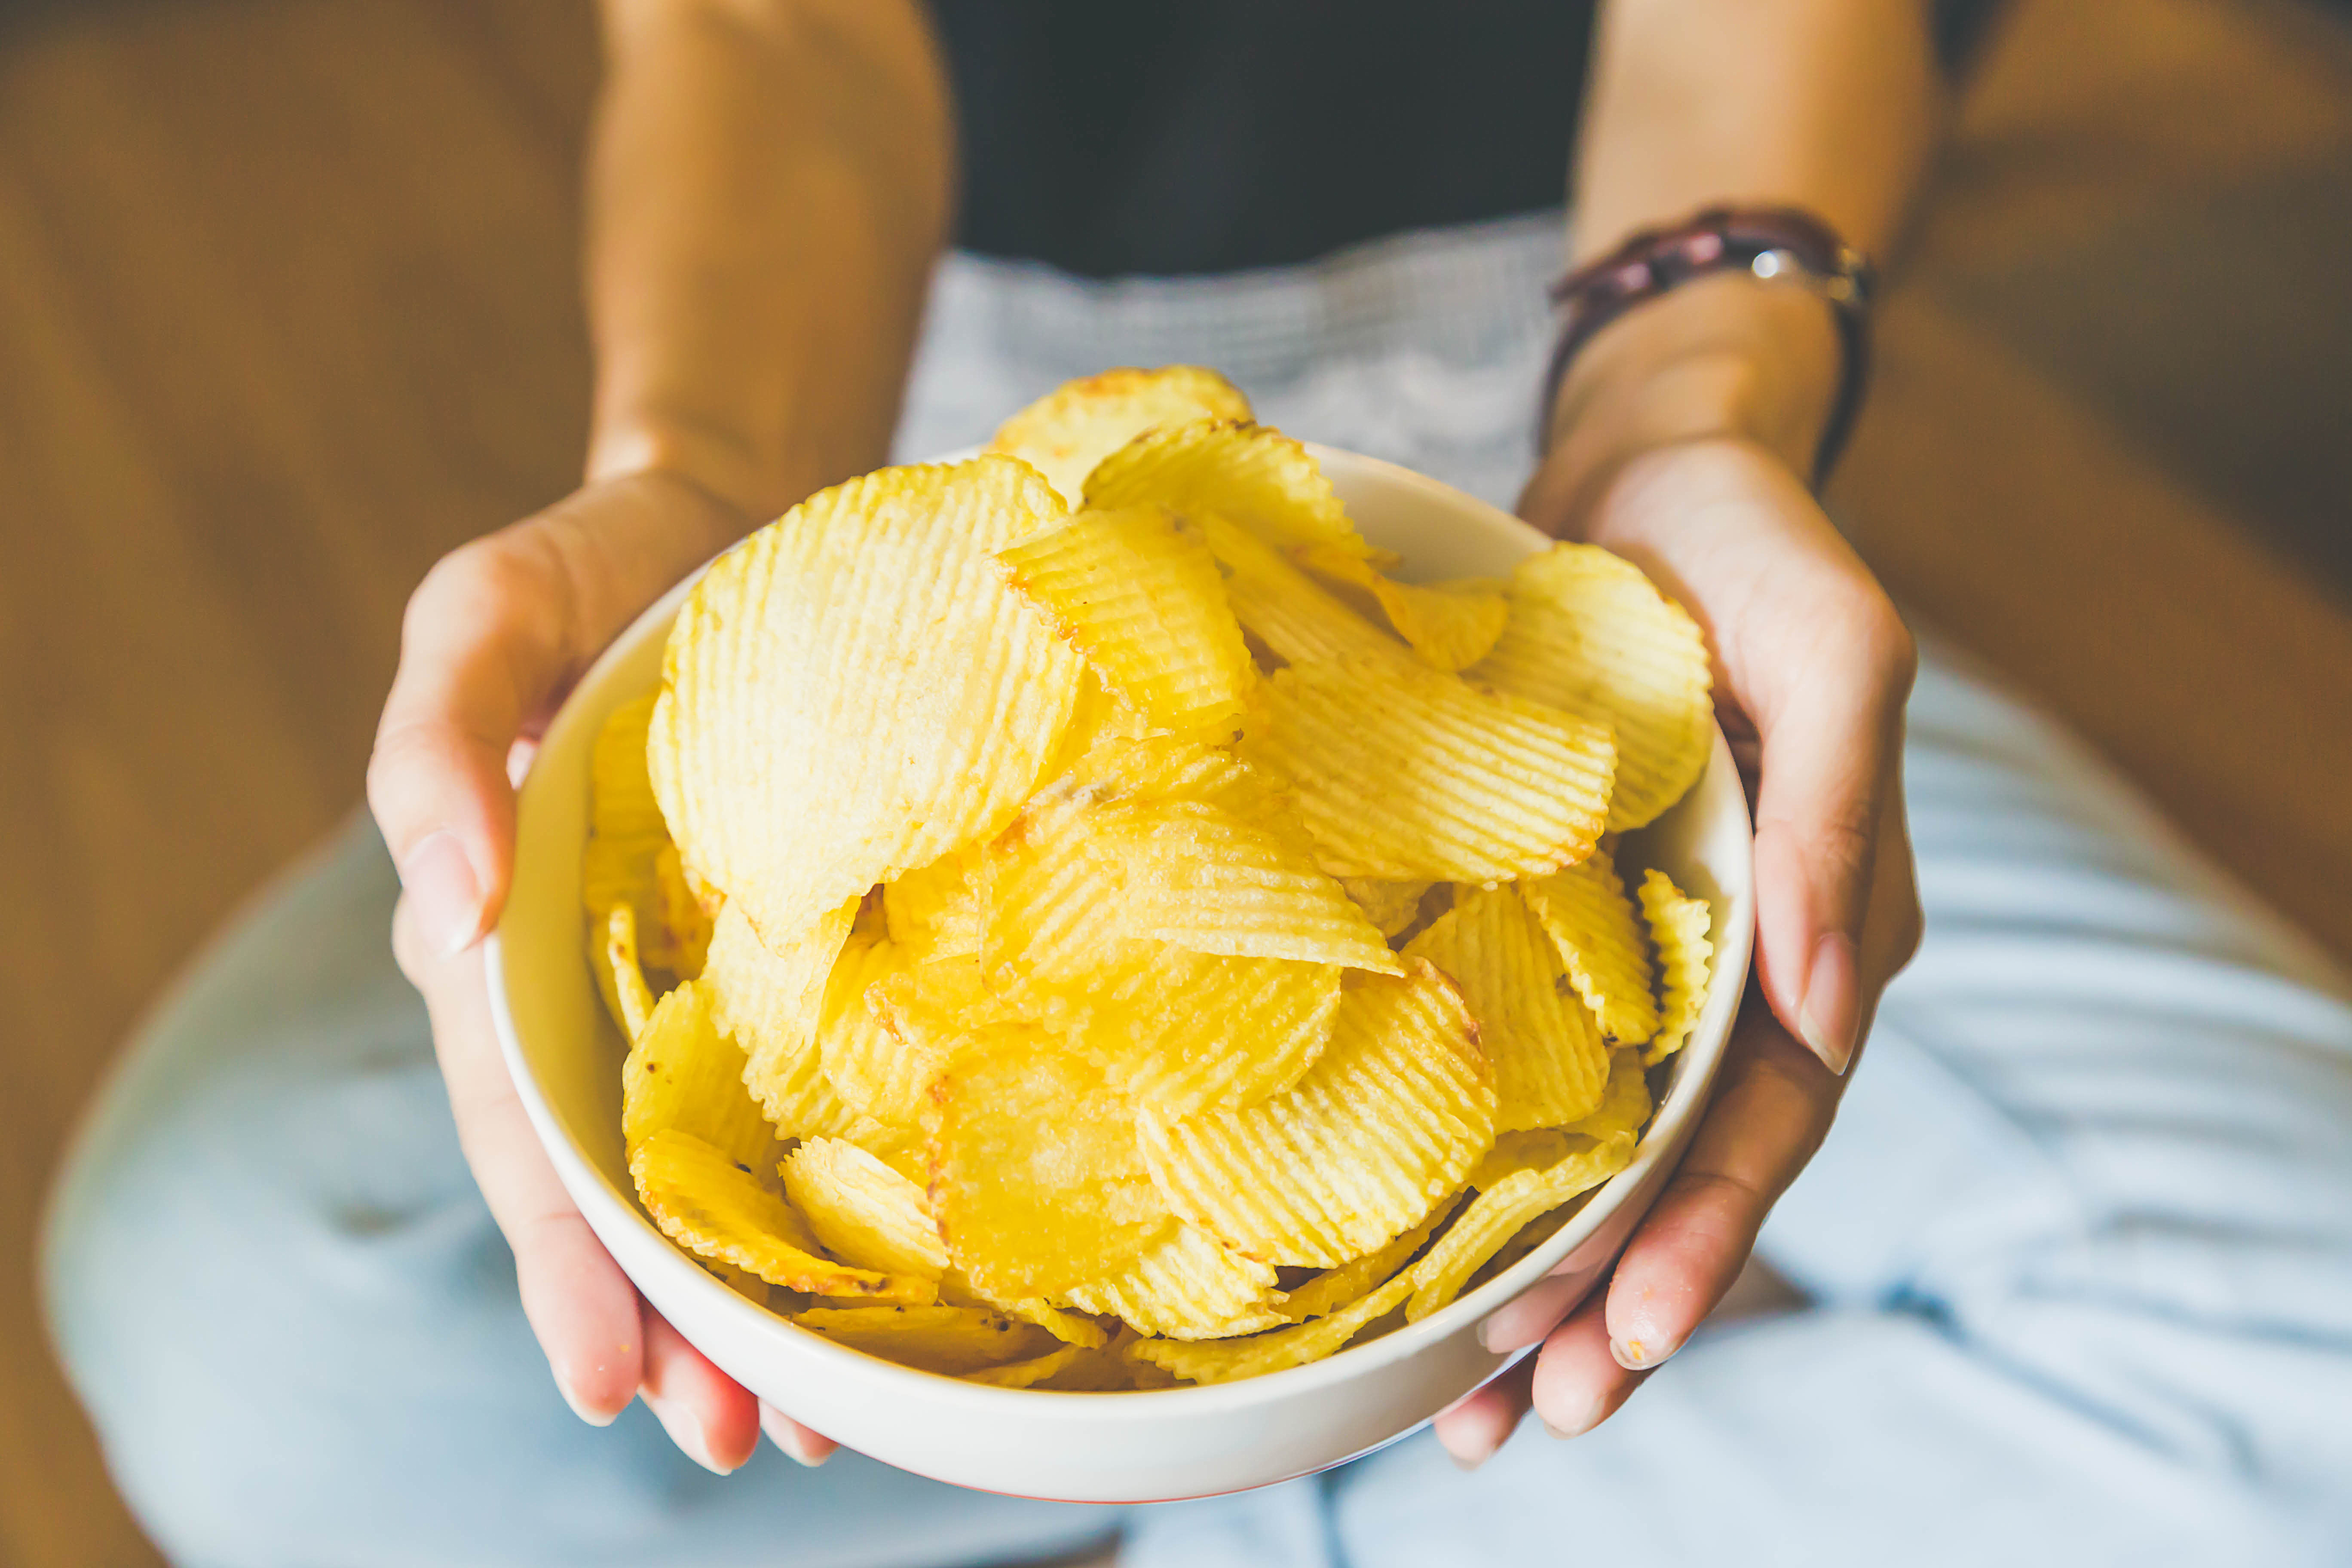 A person holding a bowel of potato chips | Source: Shutterstock